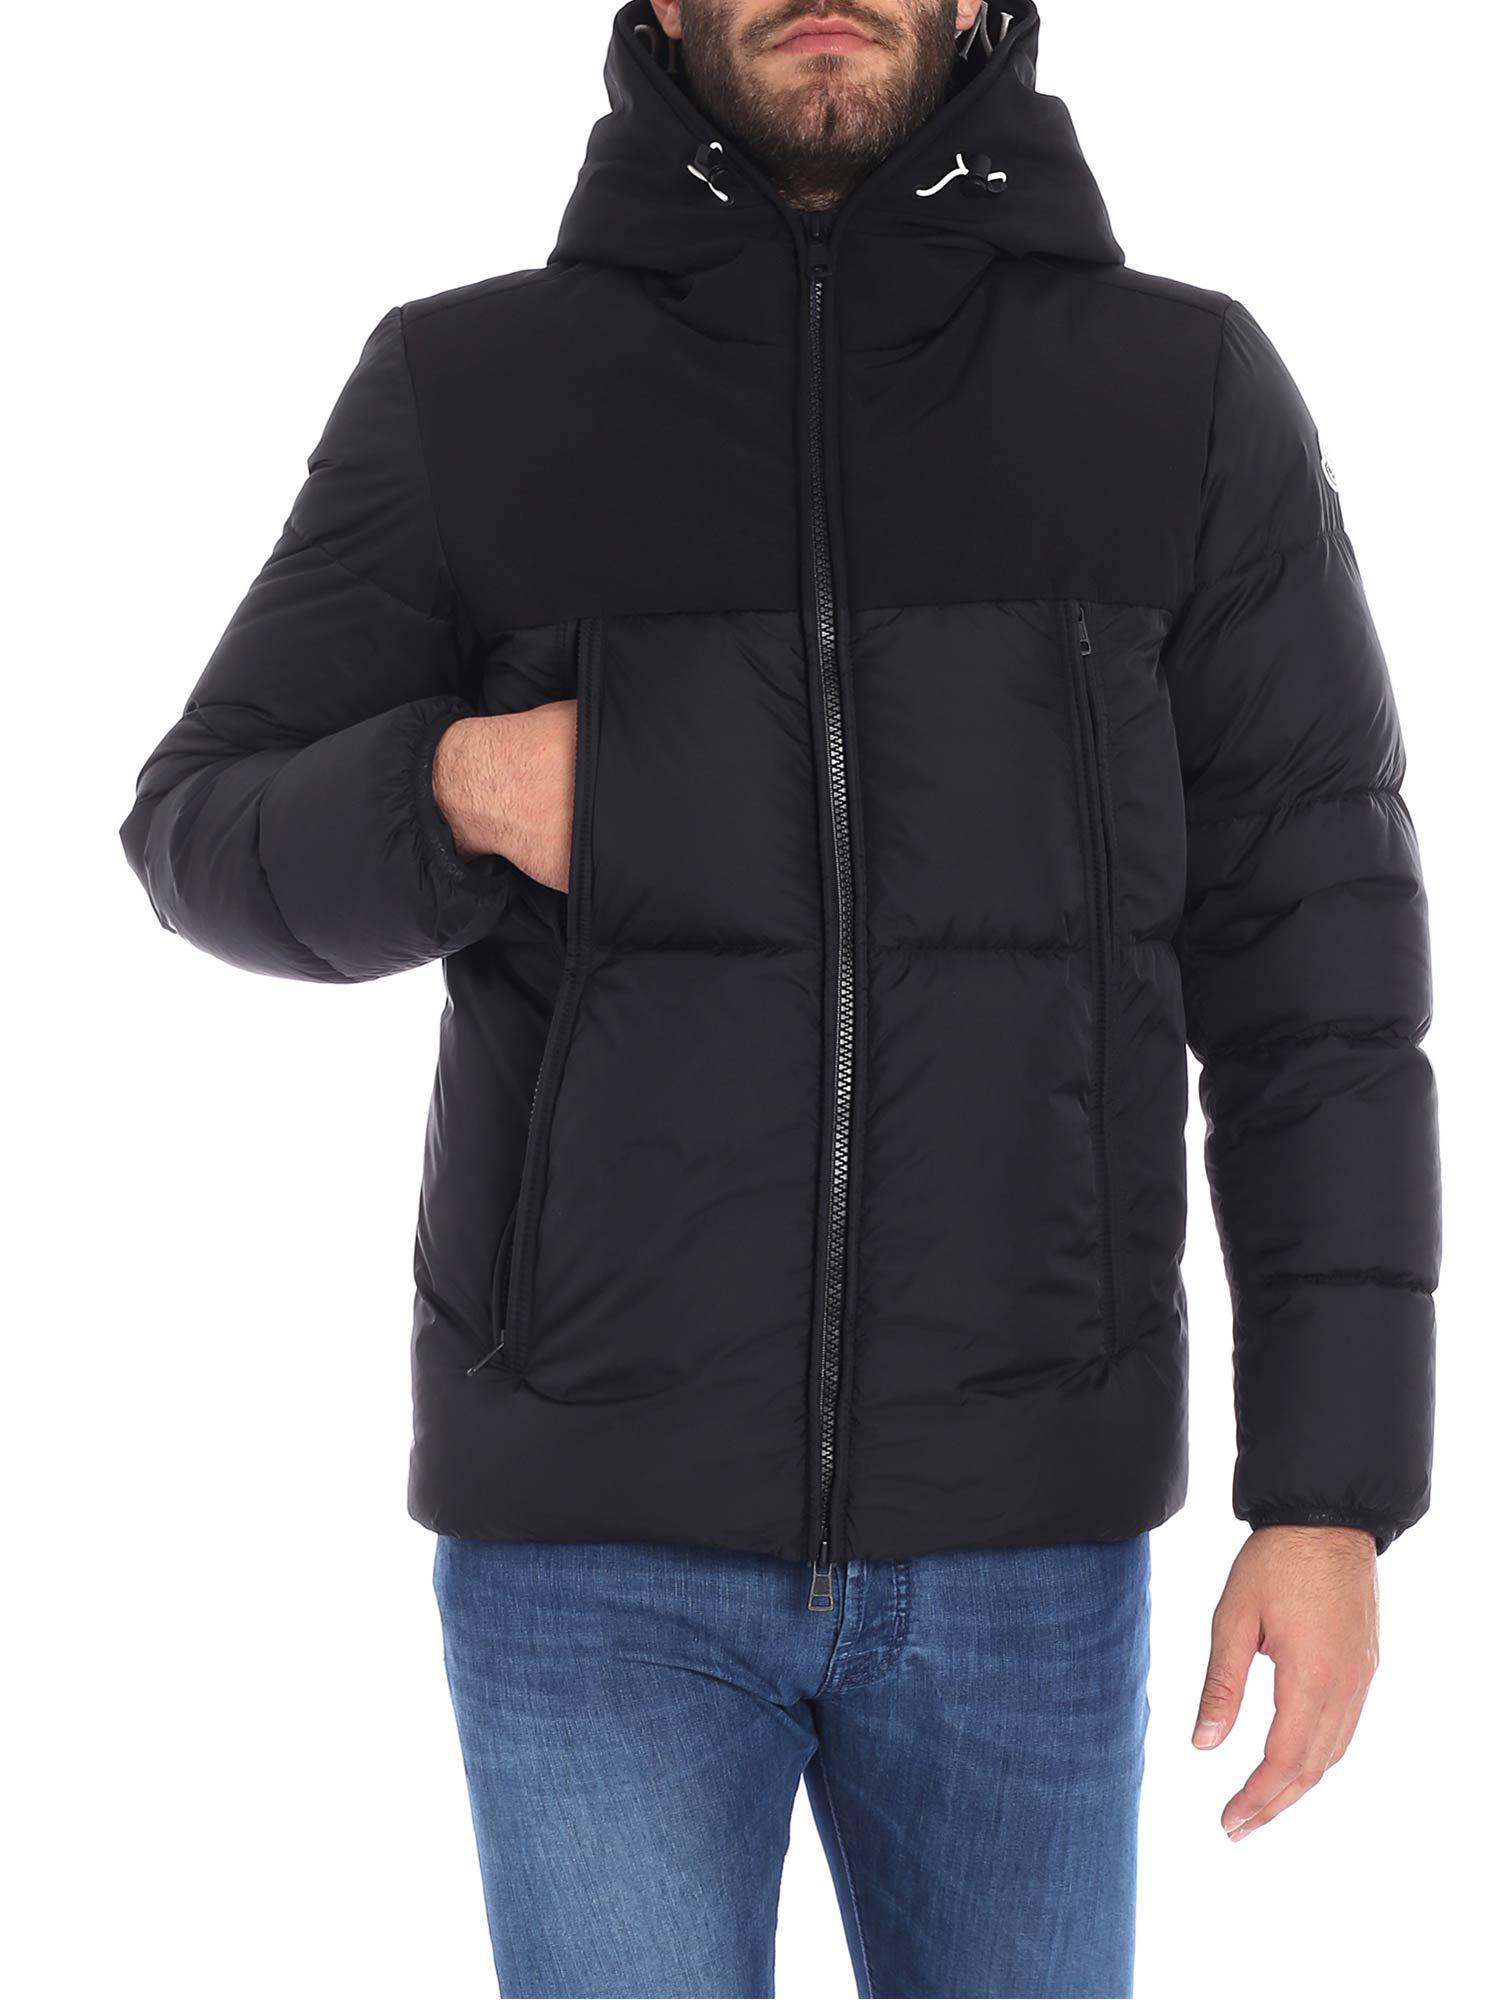 Moncler Montclar Hooded Padded Jacket Hotsell, 56% OFF |  www.myelectricalceu.com